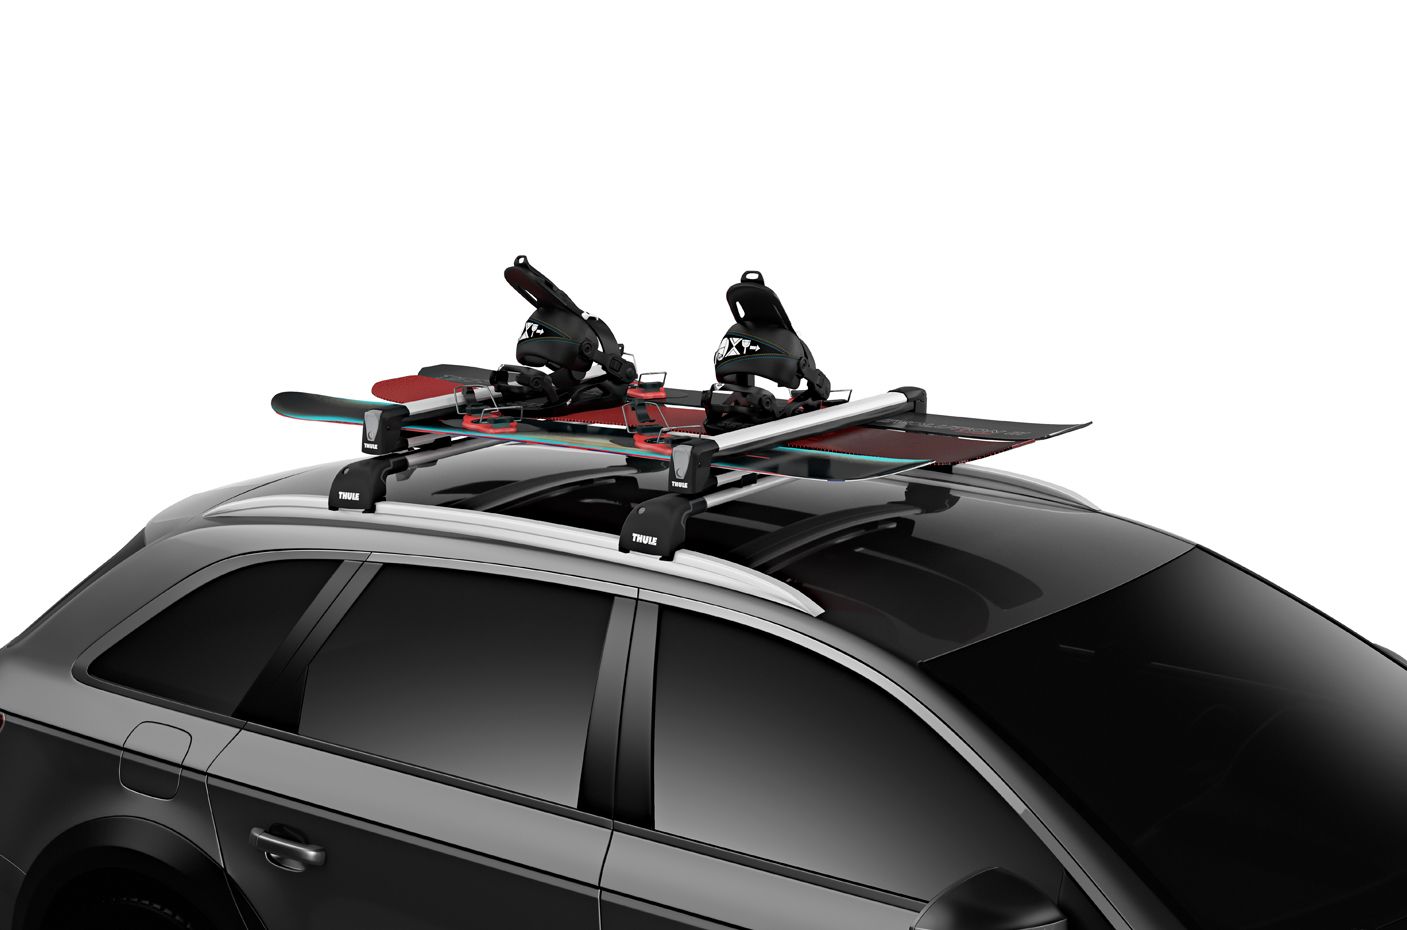 Thule Snowpack 7326 snowboards on car